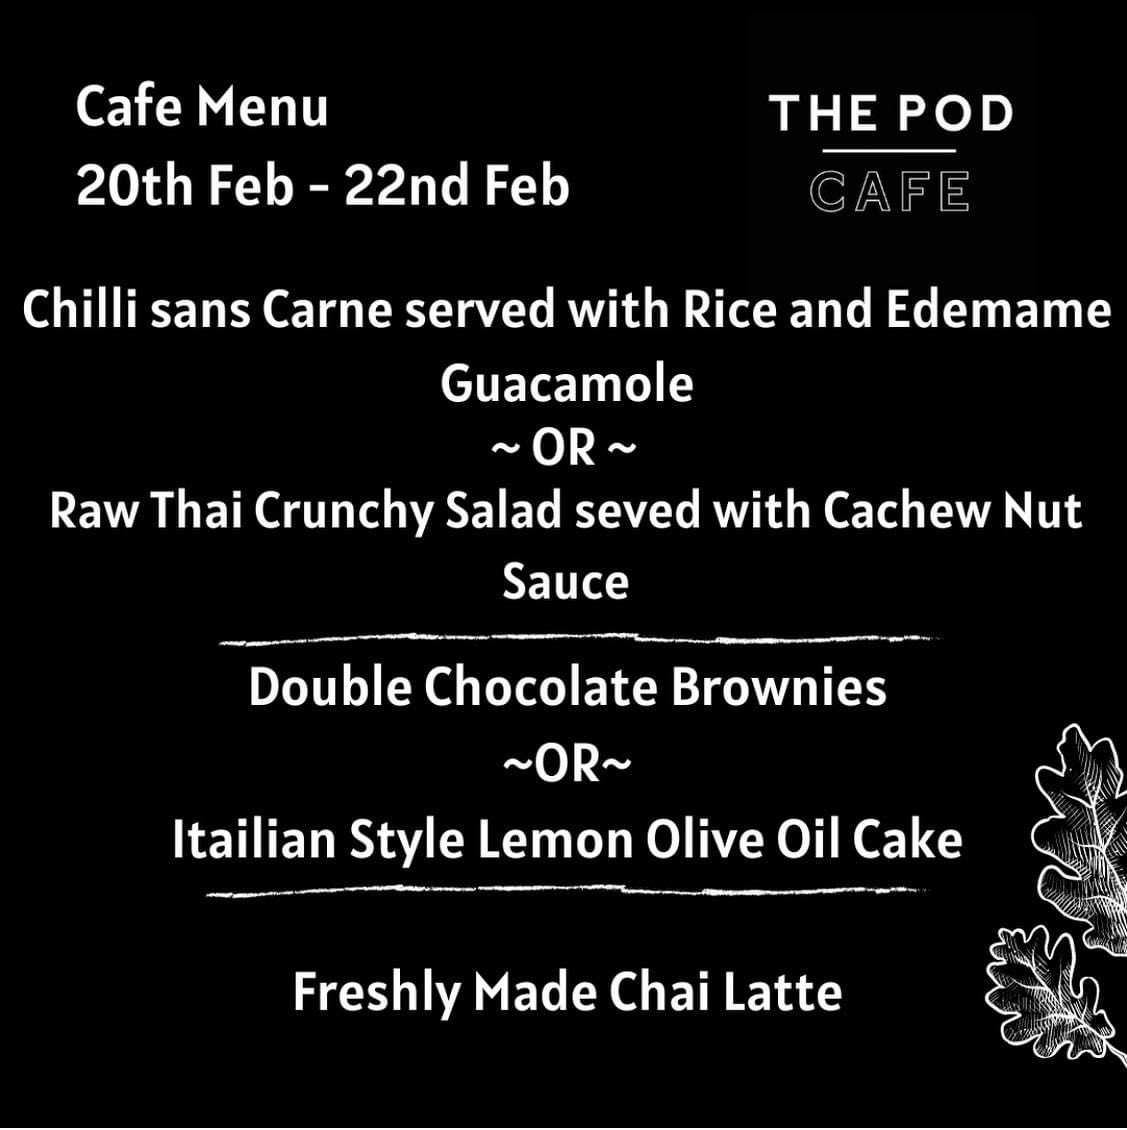 Here is this weeks menu. Please note week we have slightly different opening hours which are as follows; Tuesday 12 - 3 Wednesday 12 - 3 Thursday 11:30 - 2 Come and join us for a great lunch and great music and vibe @the_pod_cafe #vegan #madefromscratch #tastyfood